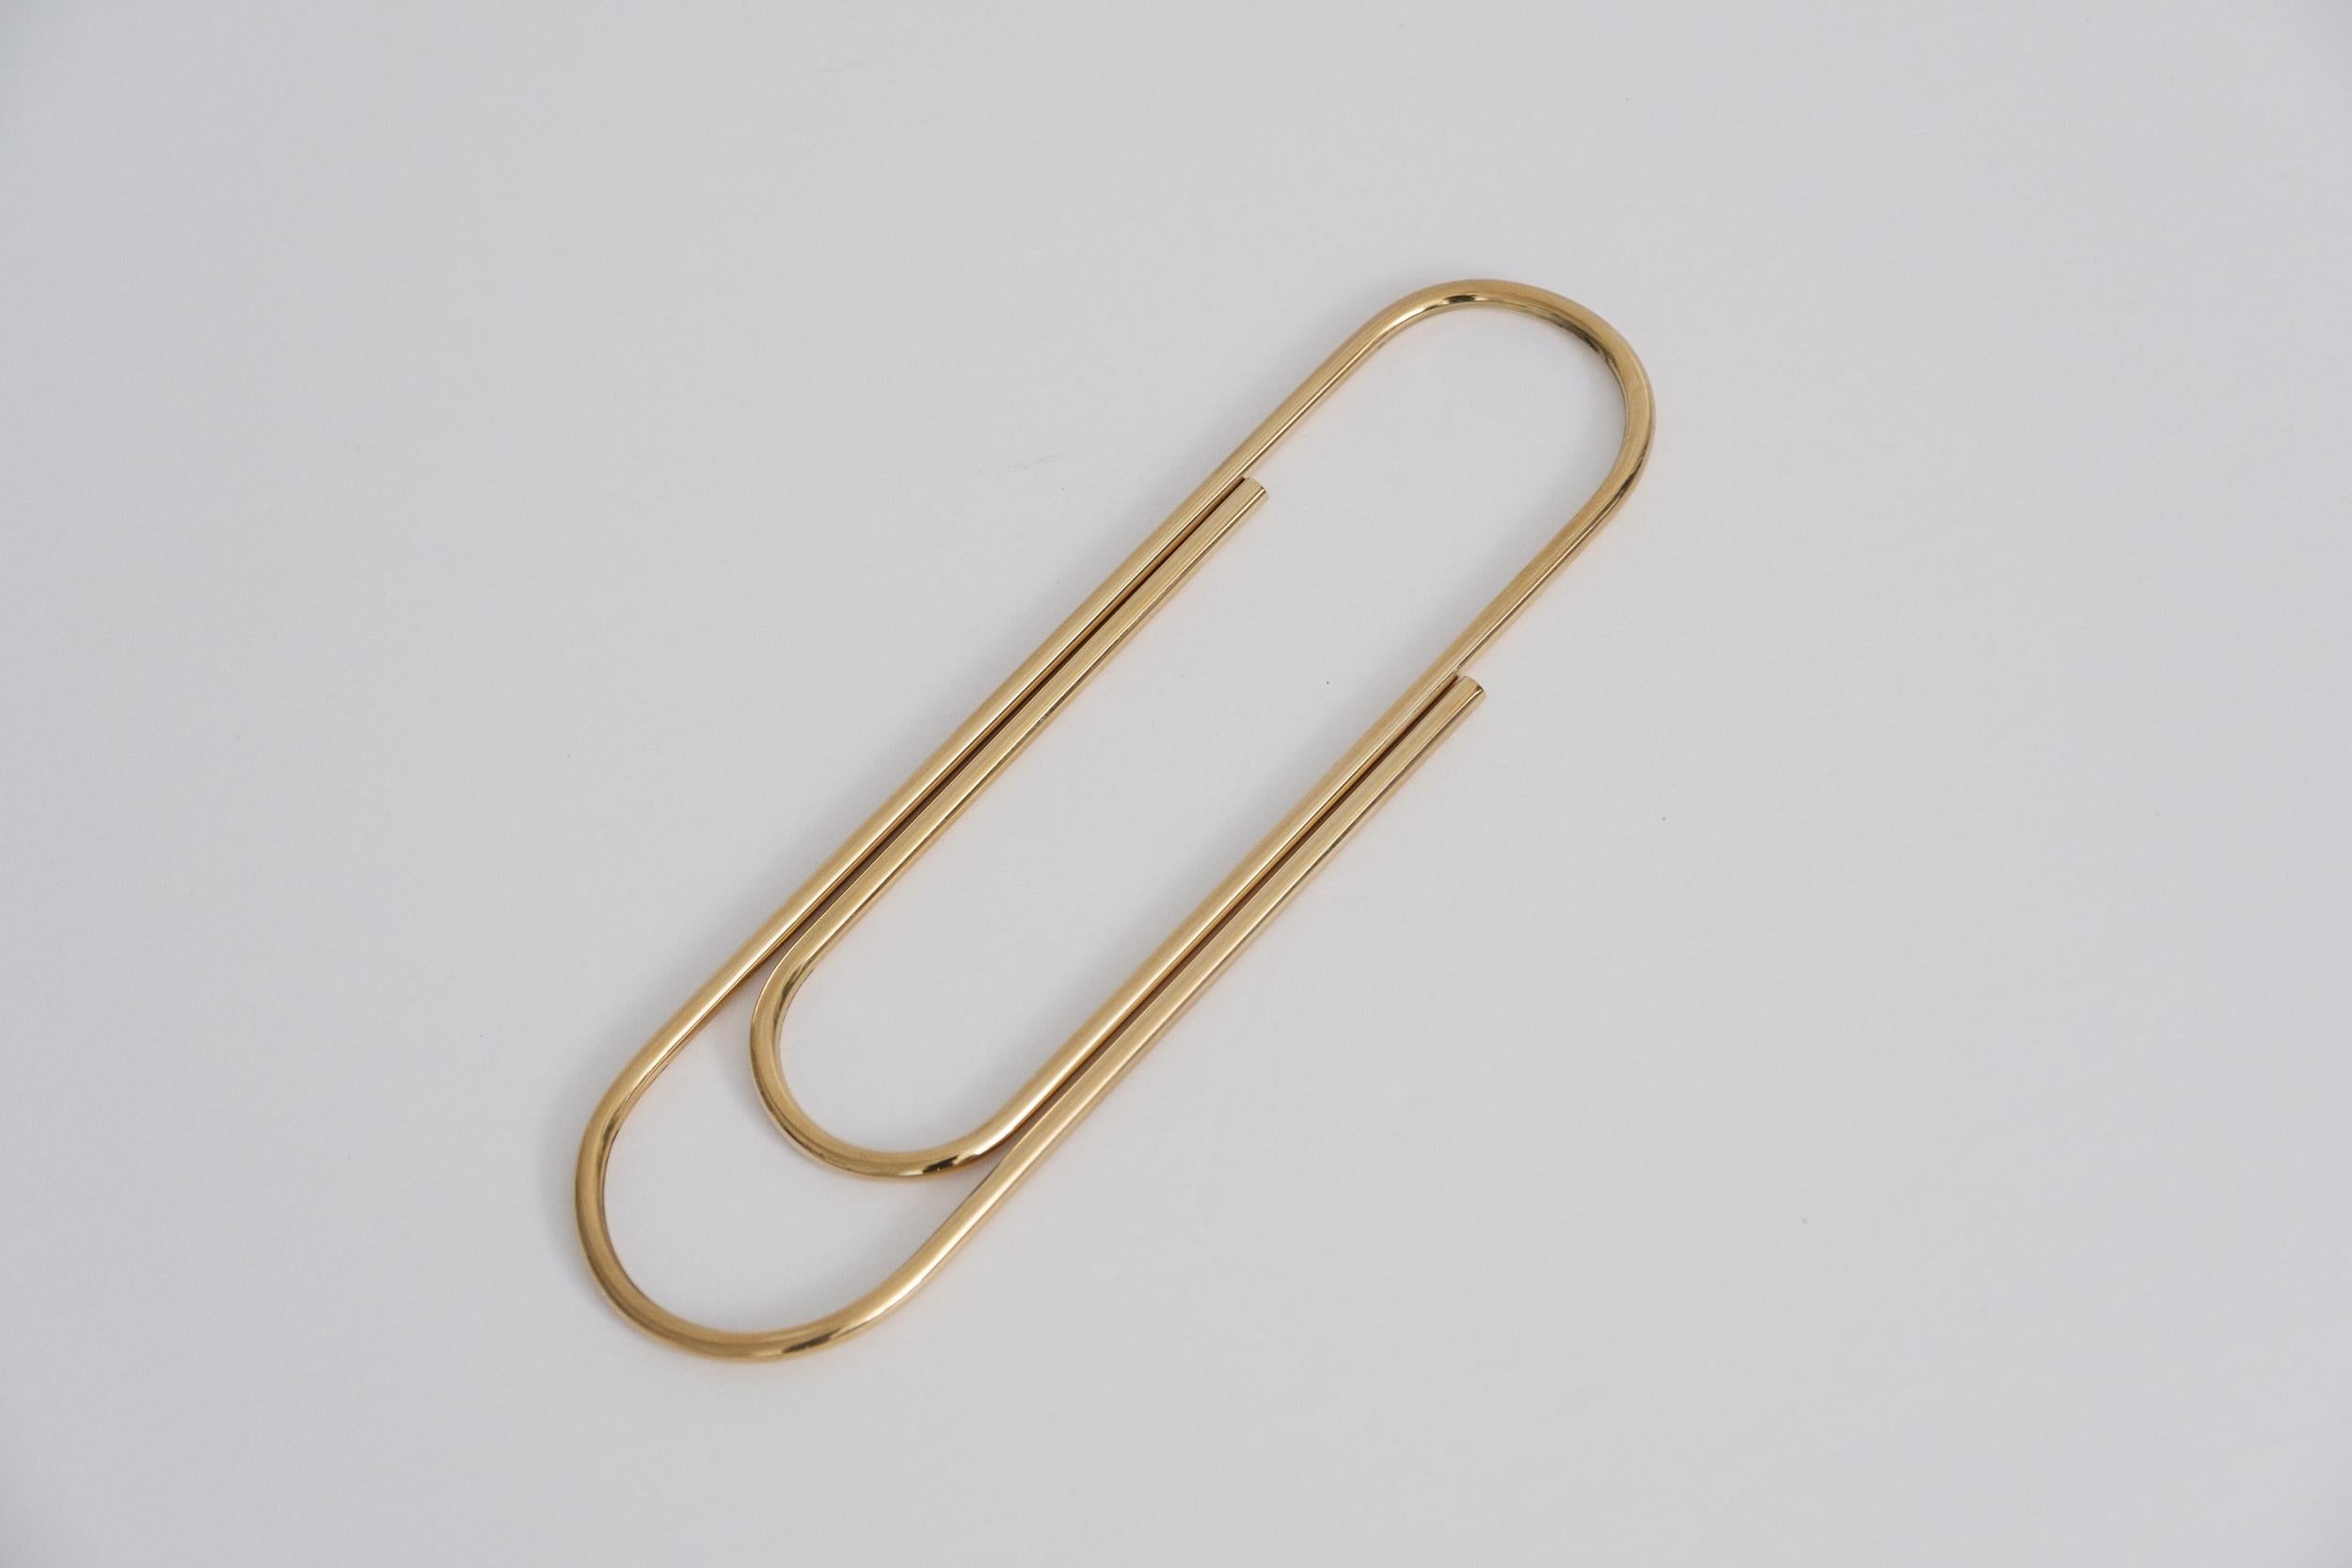 Large Carl Auböck Model #4751 'Paperclip' Brass Paperweight For Sale 1